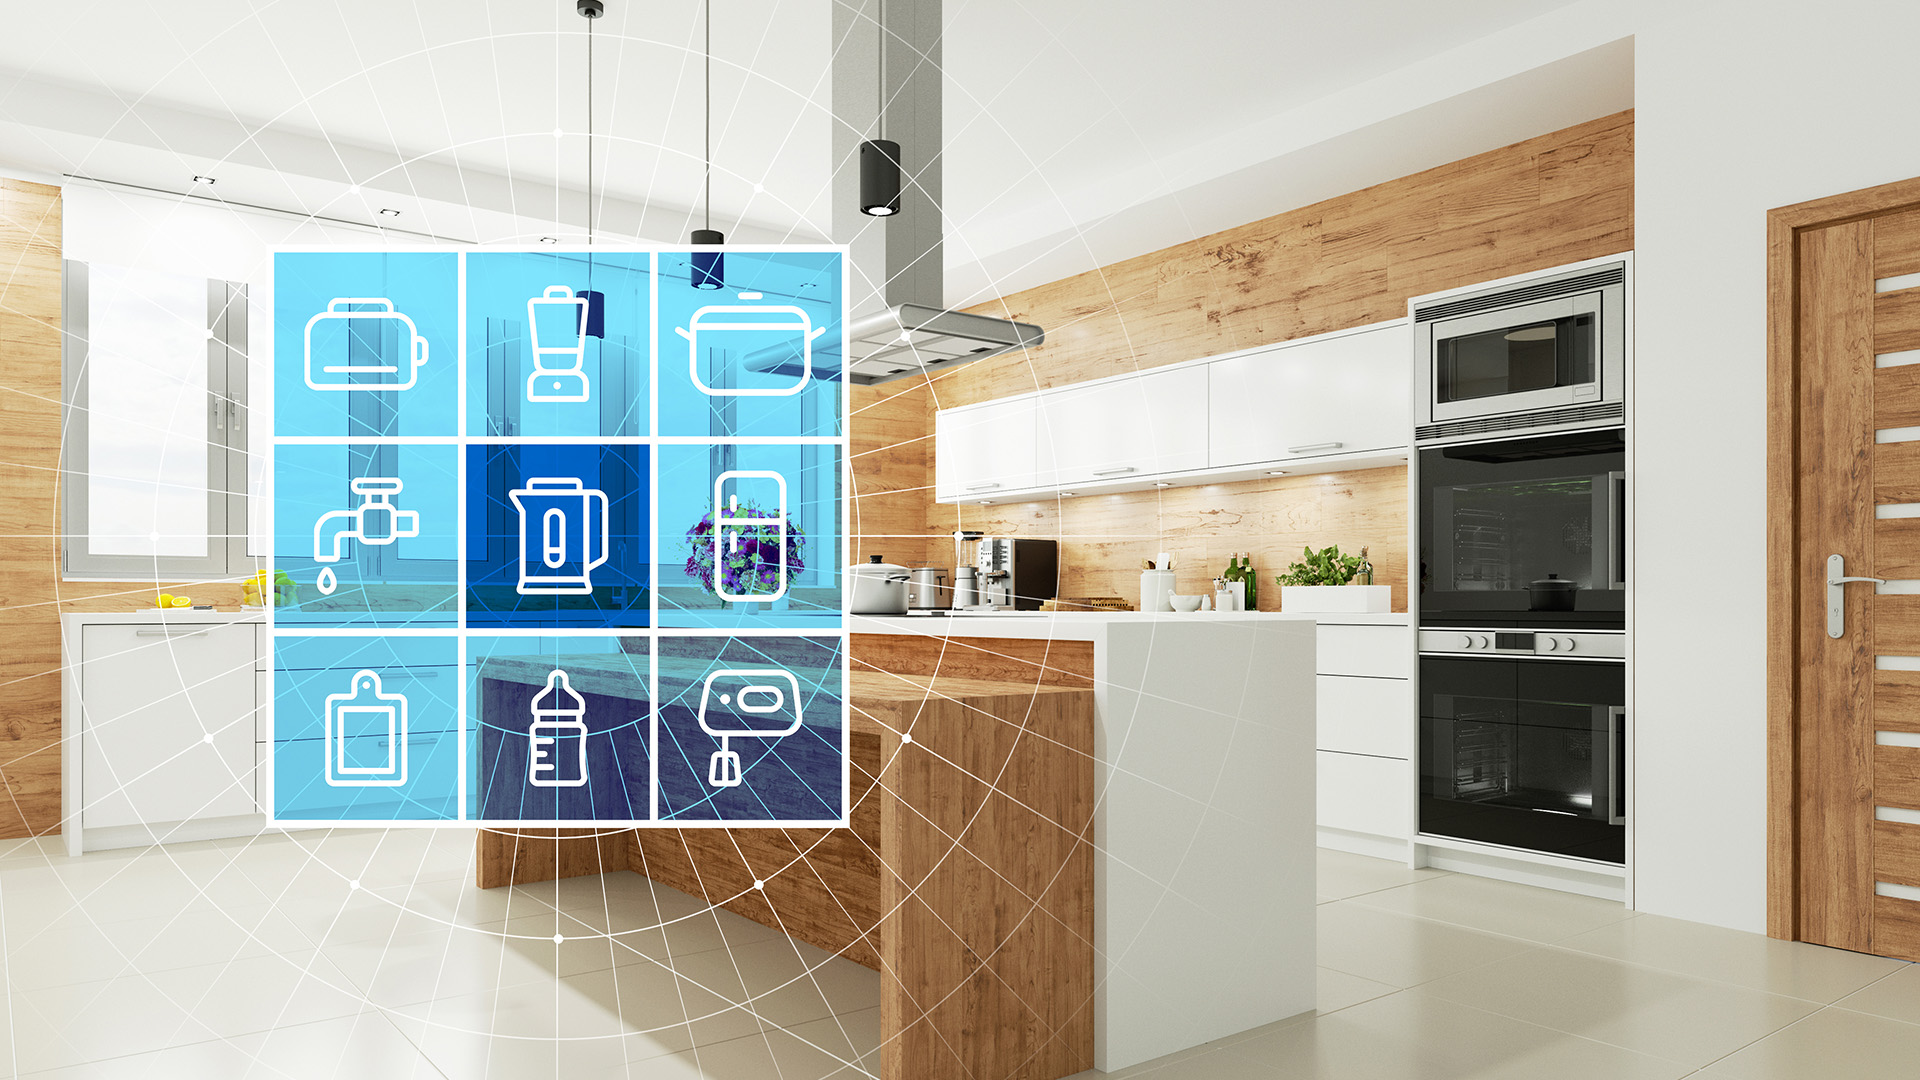 Internet of Things Devices in a Smart Home Kitchen